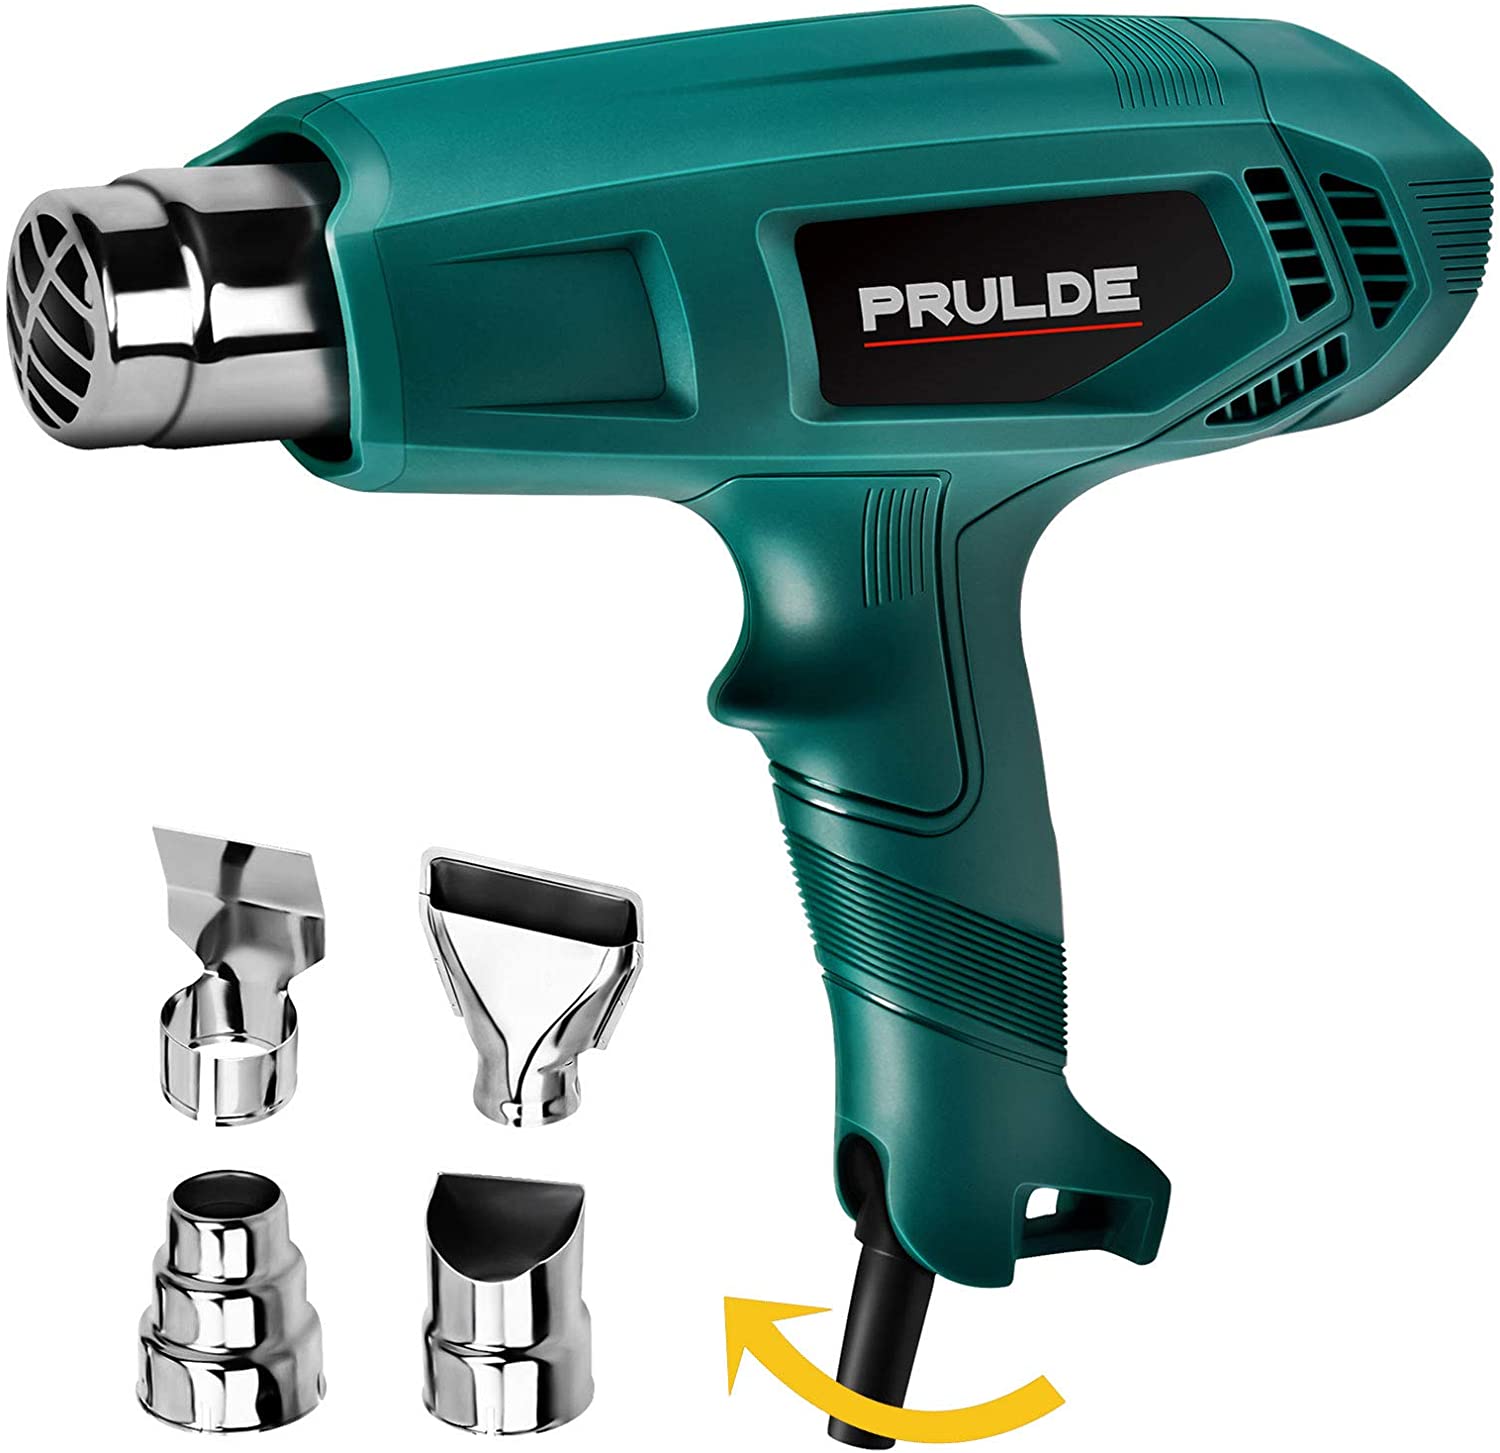 PRULDE Dual Temperature Settings 752 -1112 Deg F Heat Gun, Hot Air Gun Kit with 4 Nozzles for Crafts, Shrink Wrapping/Tubing, Paint Removing - image 1 of 9